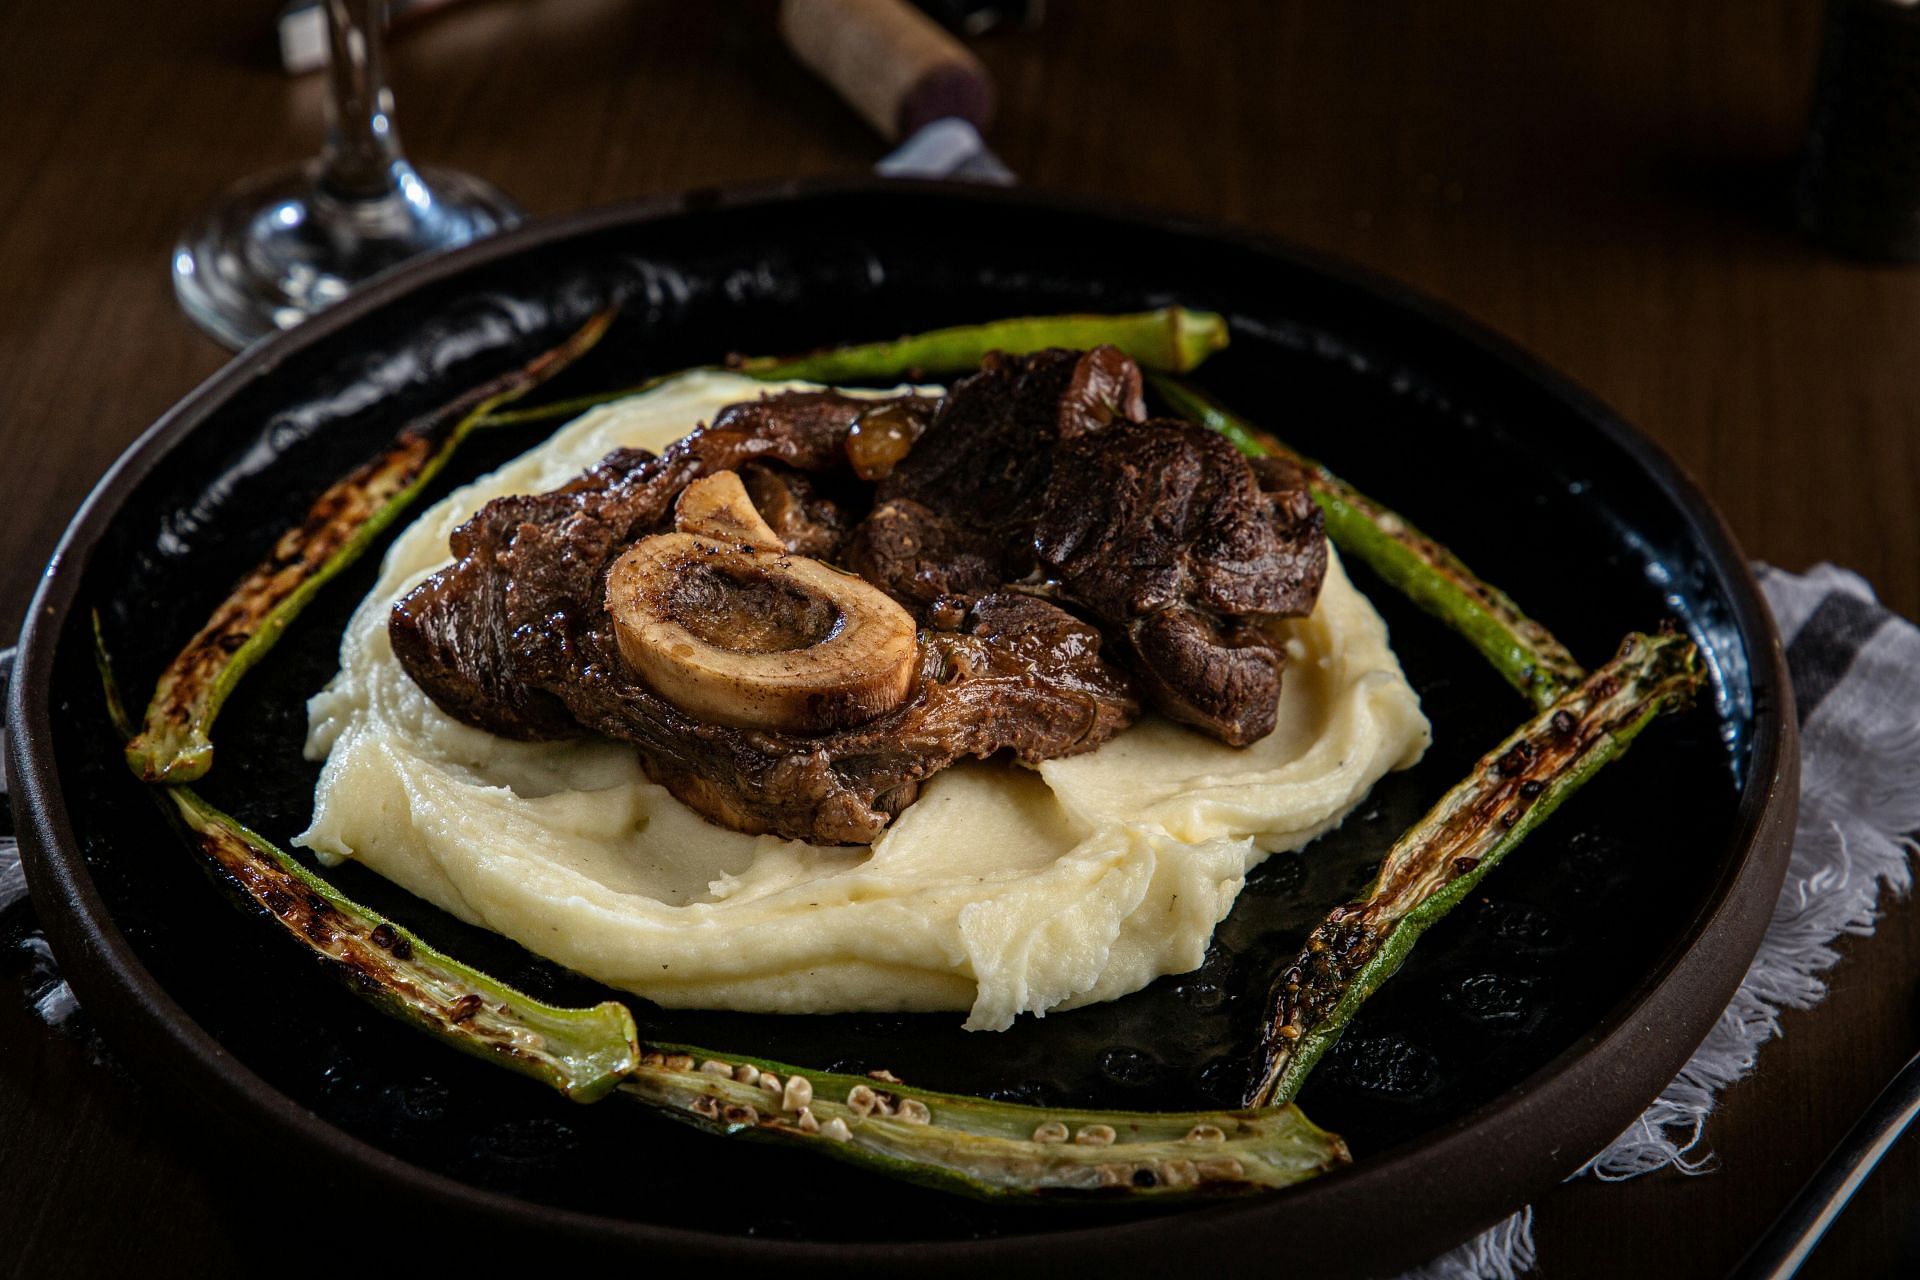 Benefits of mashed potatoes in dysphagia diet (image sourced via Pexels / Photo by Enduardo)